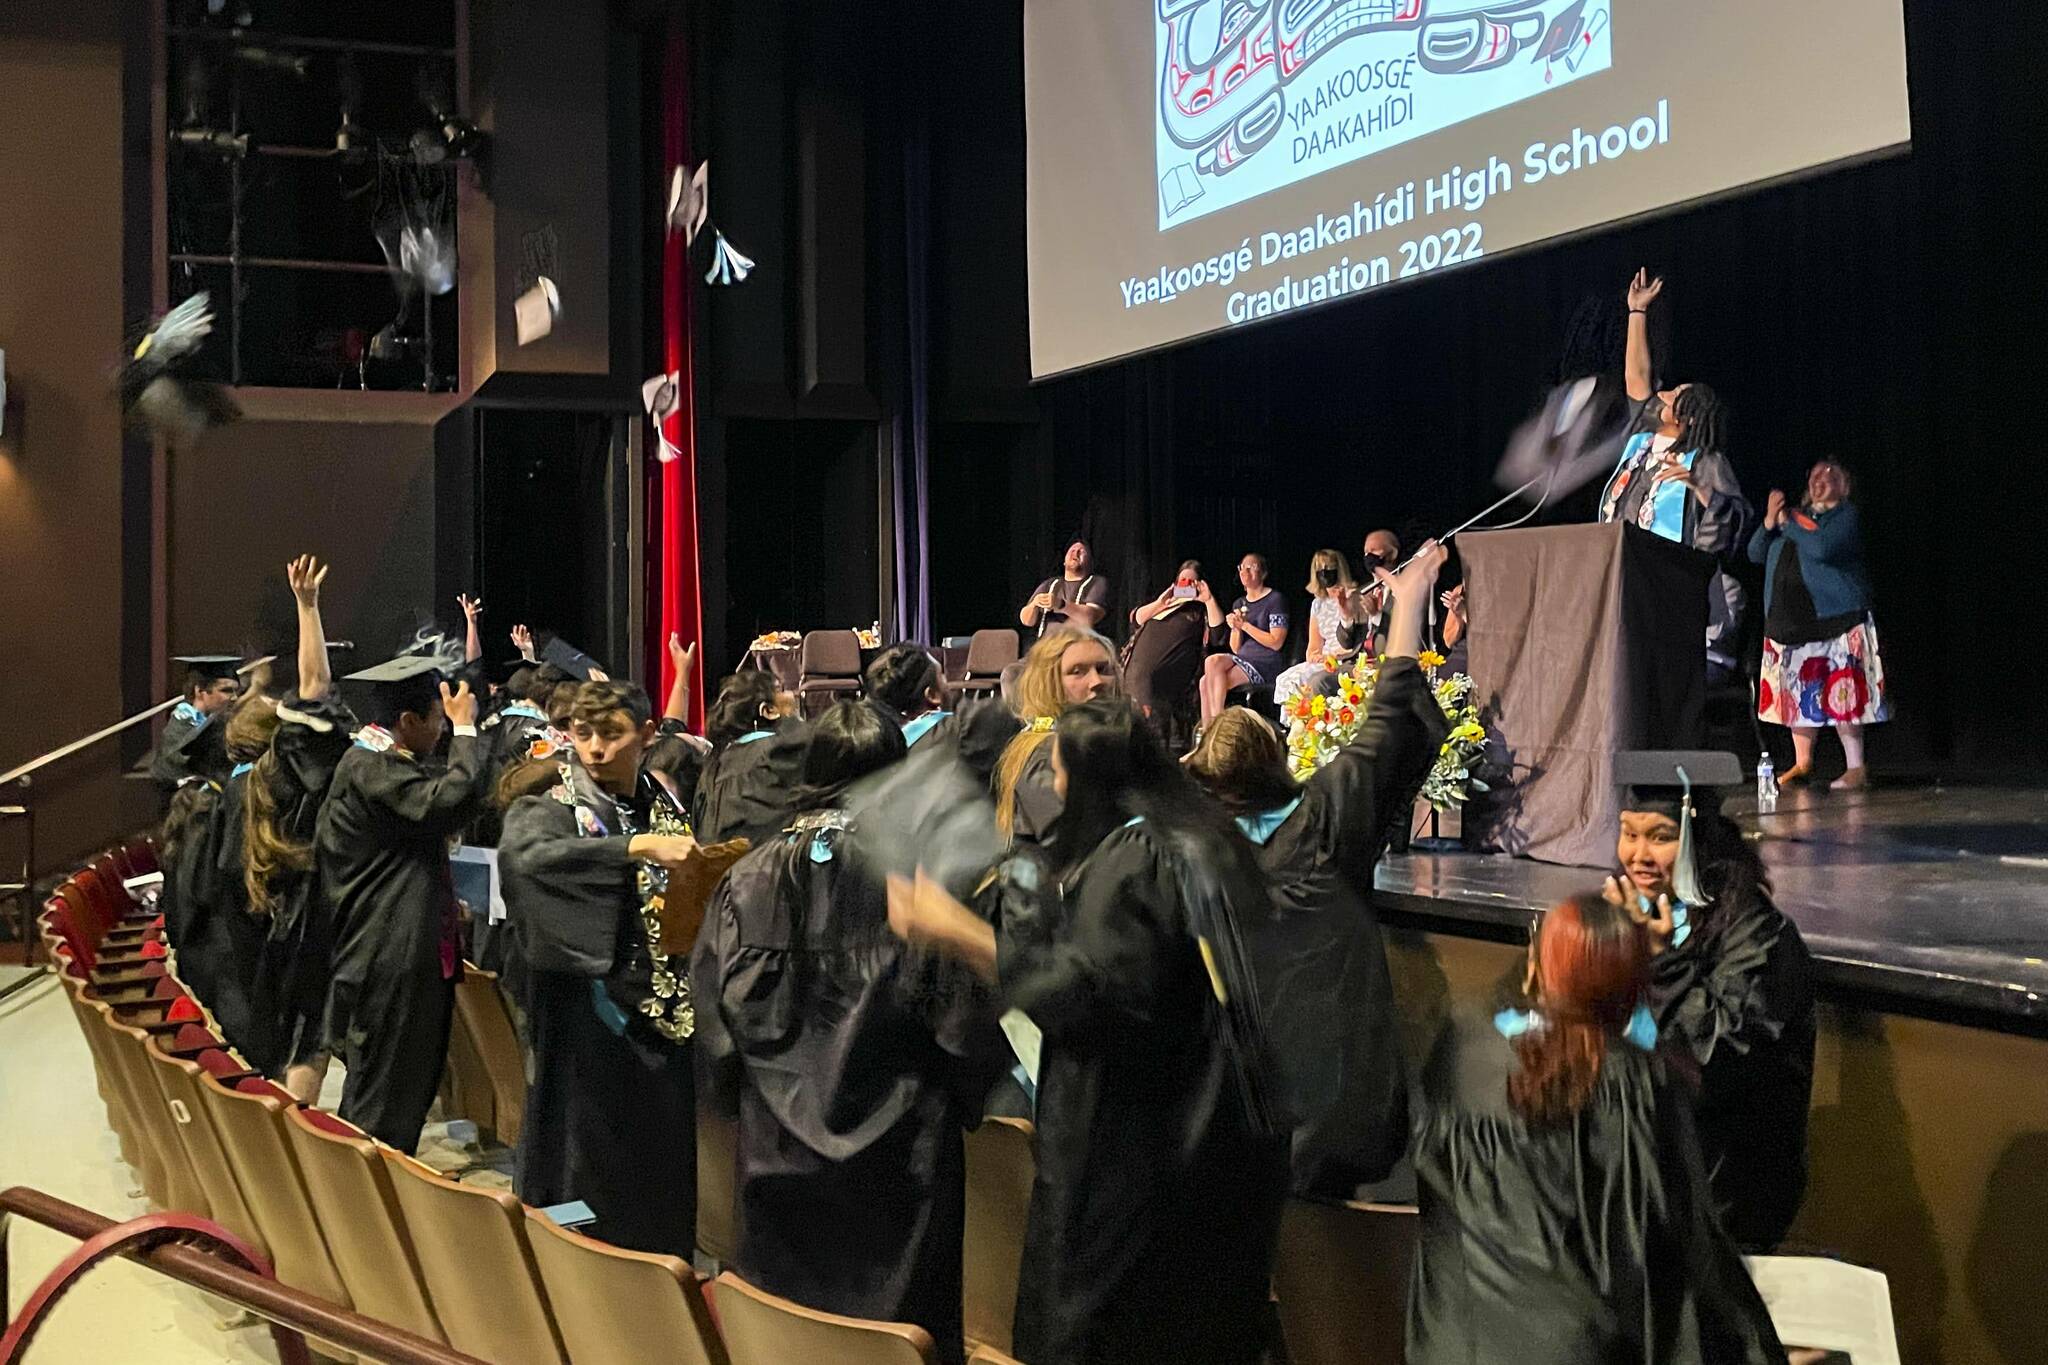 Yaakoosgé Daakahídi High School graduates toss their caps at the conclusion of the graduation ceremony on May 29, 2022. (Michael S. Lockett / Juneau Empire)